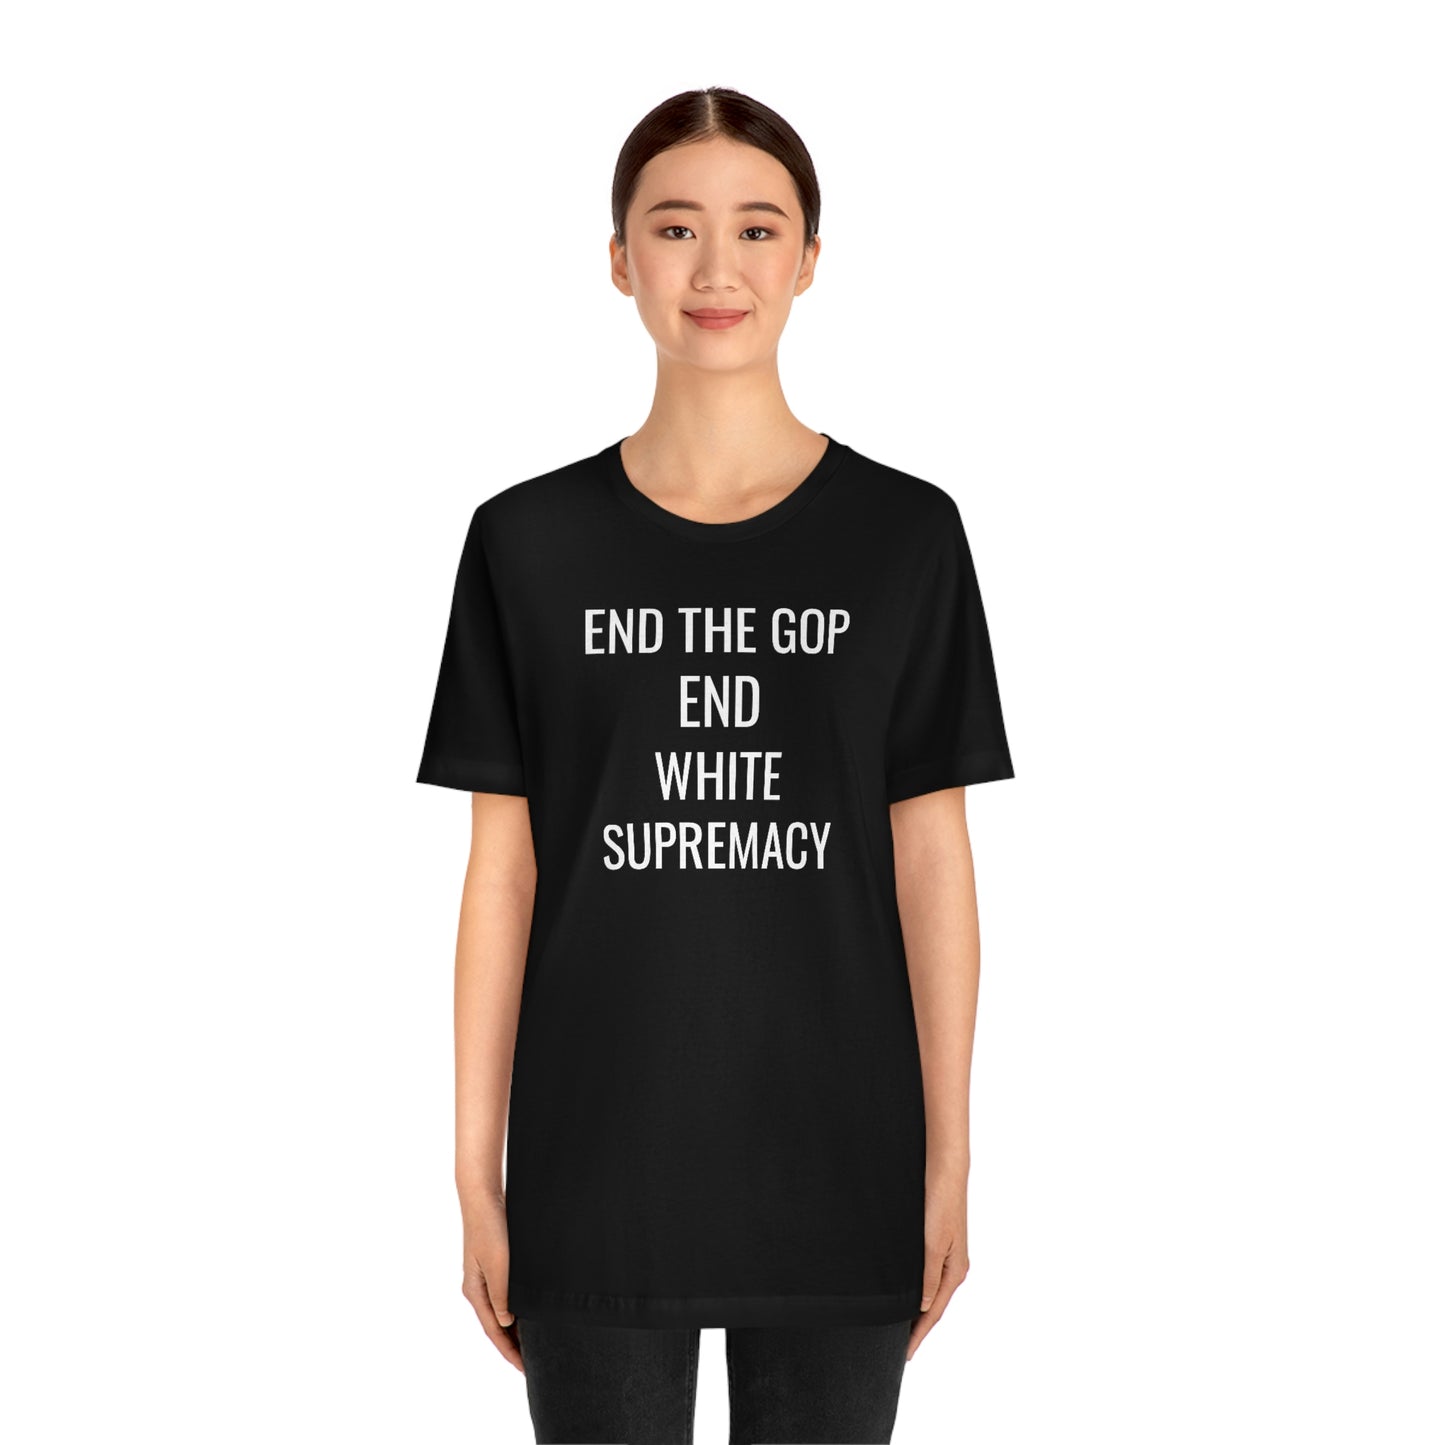 END THE GOP/END WHITE SUPREMACY Unisex Jersey Short Sleeve Black Tee (SirTalksALot Exclusive)